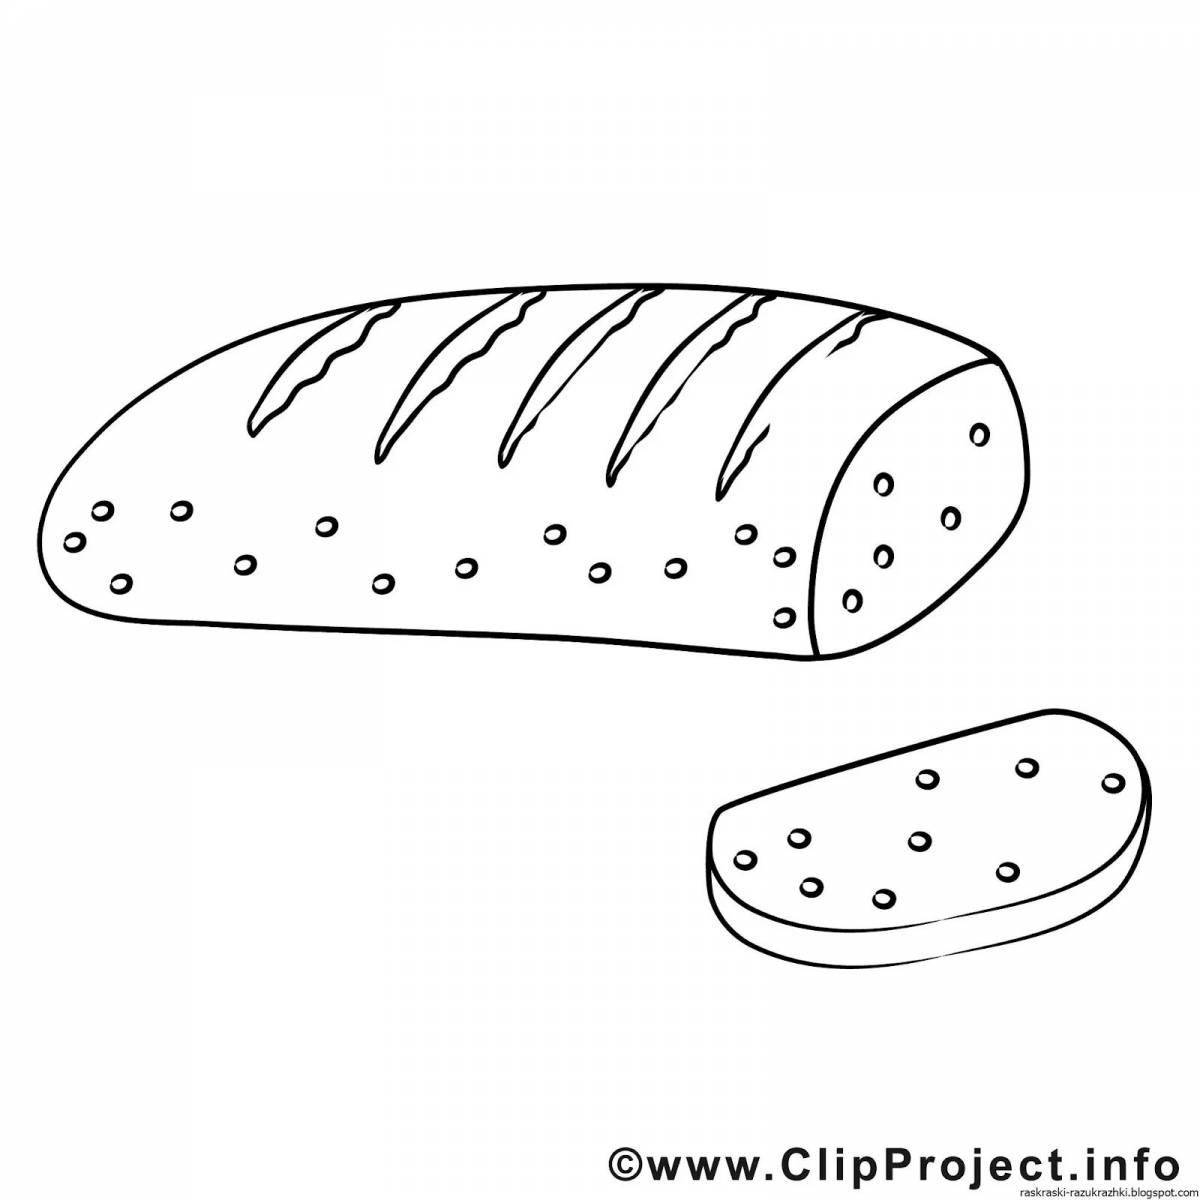 Fun loaf coloring page for babies